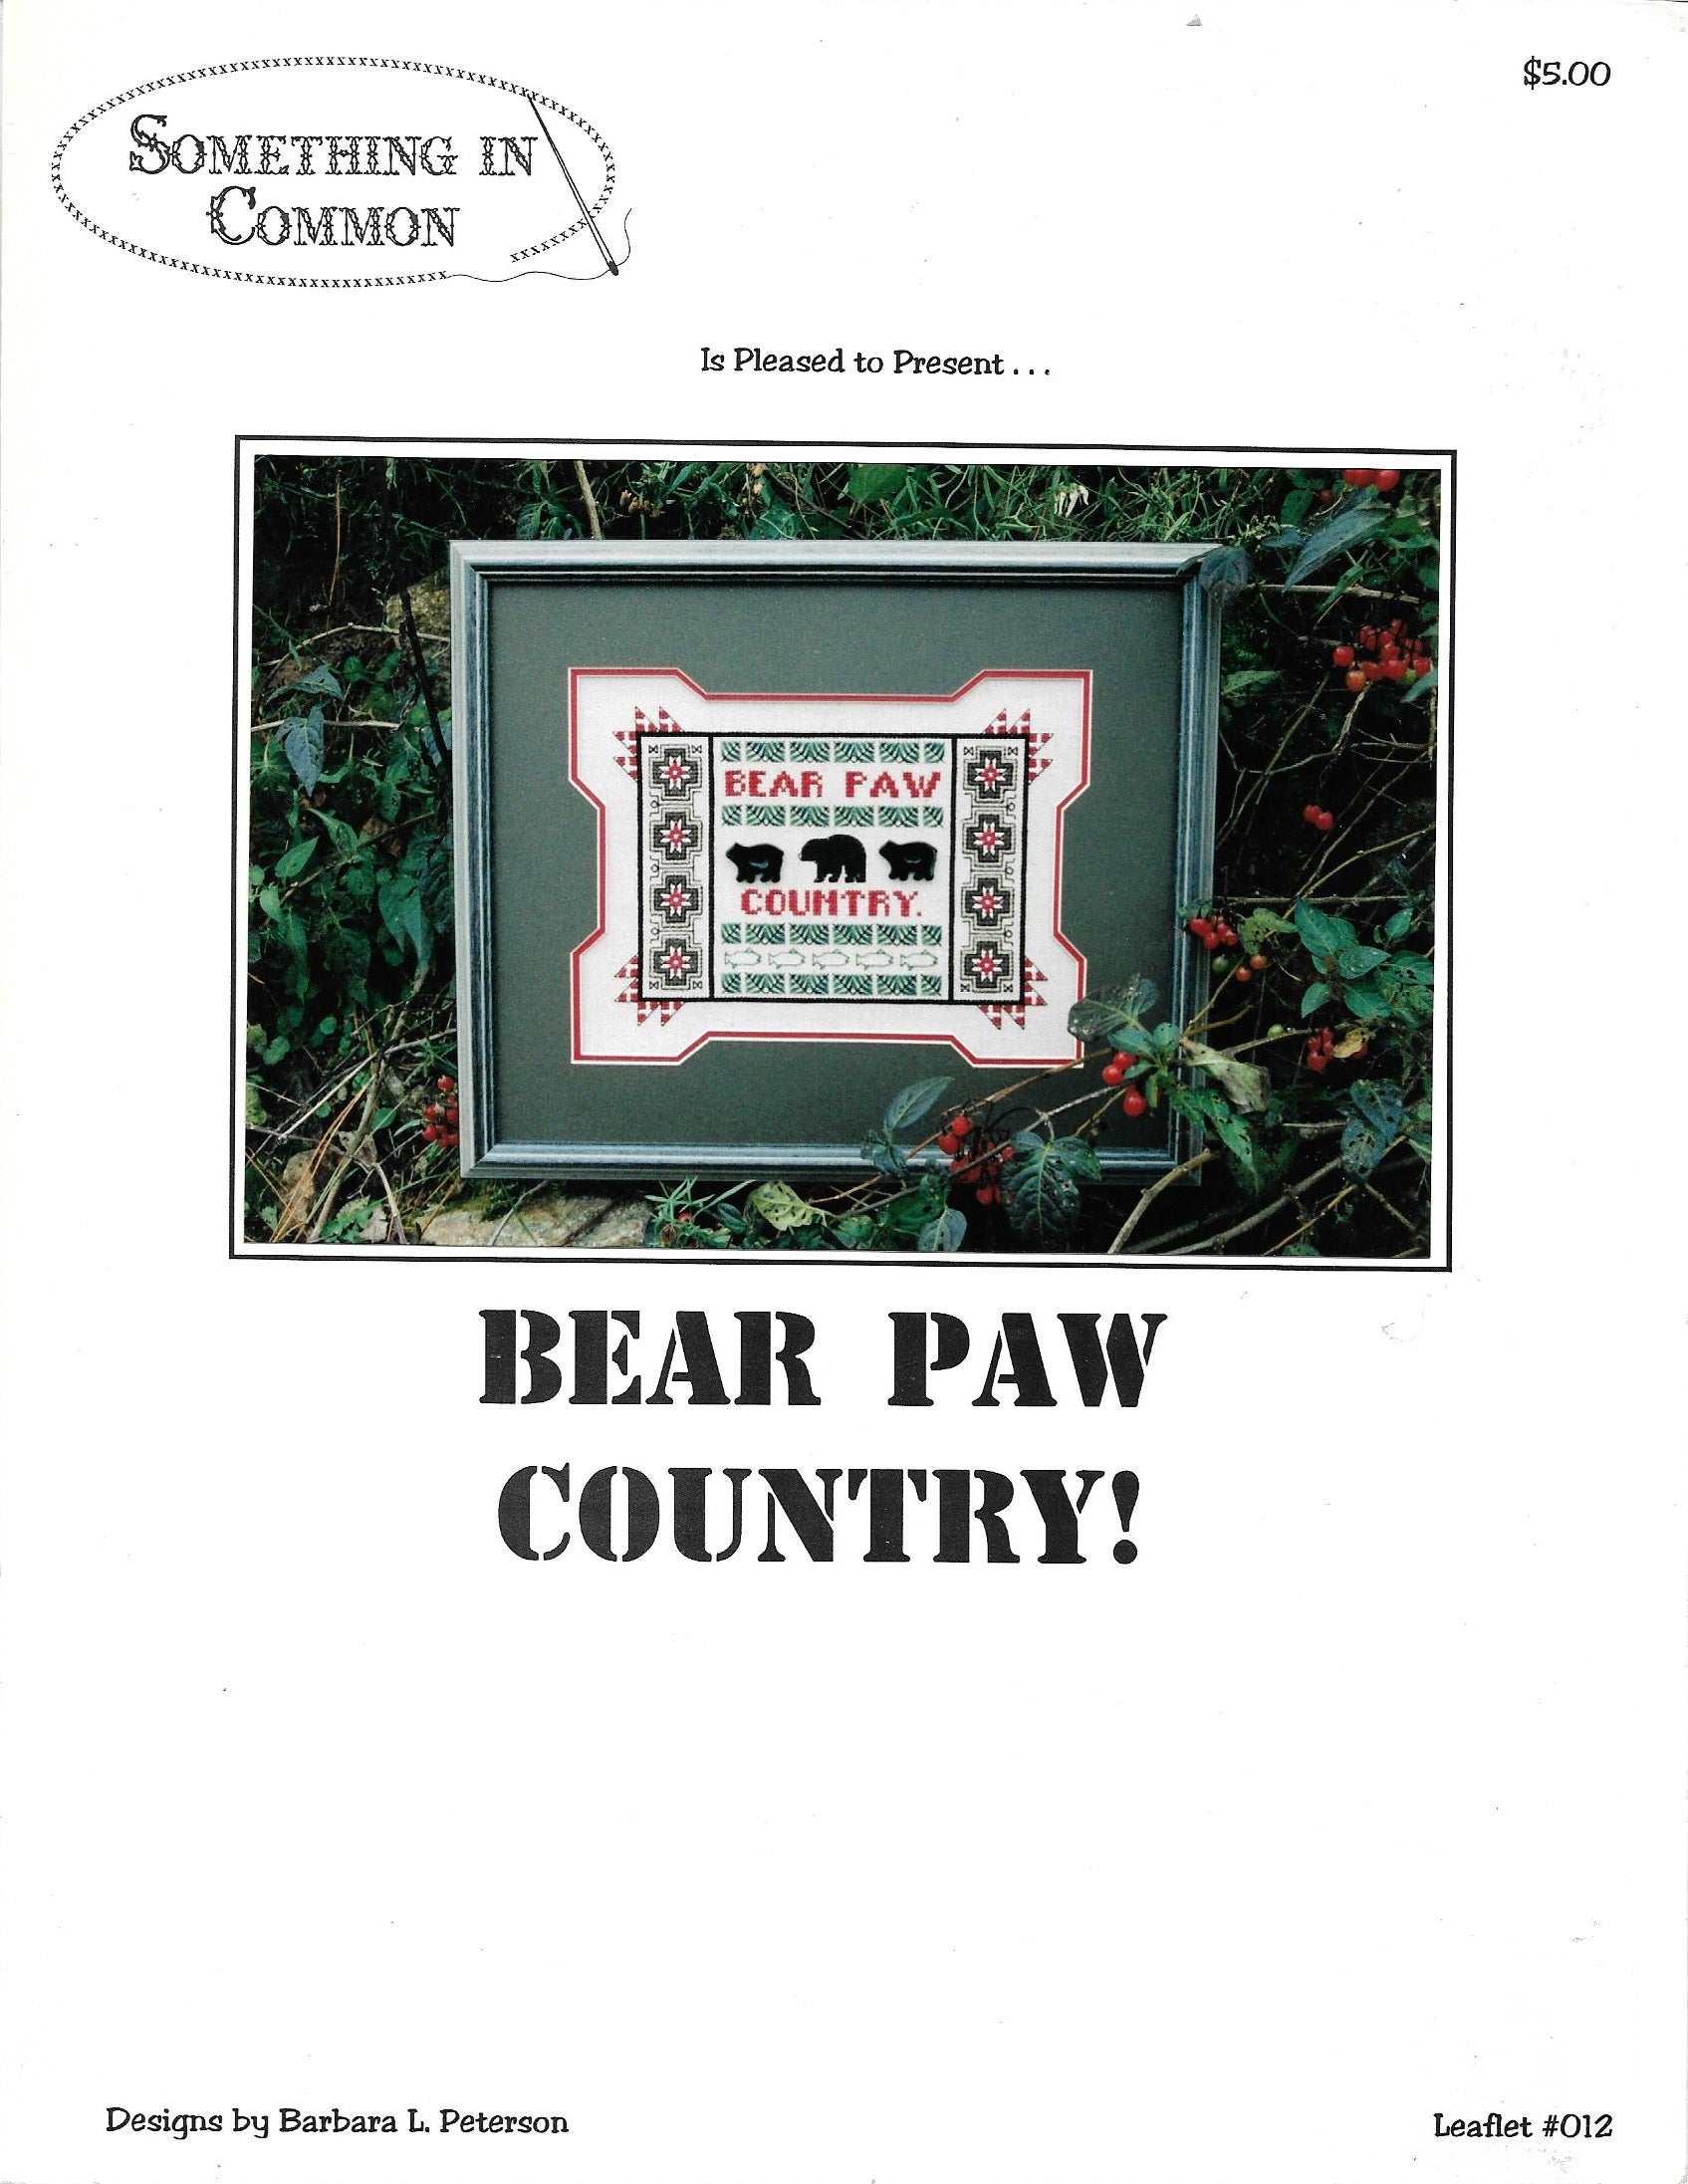 Something in Common Bear Paw Country cross stitch pattern